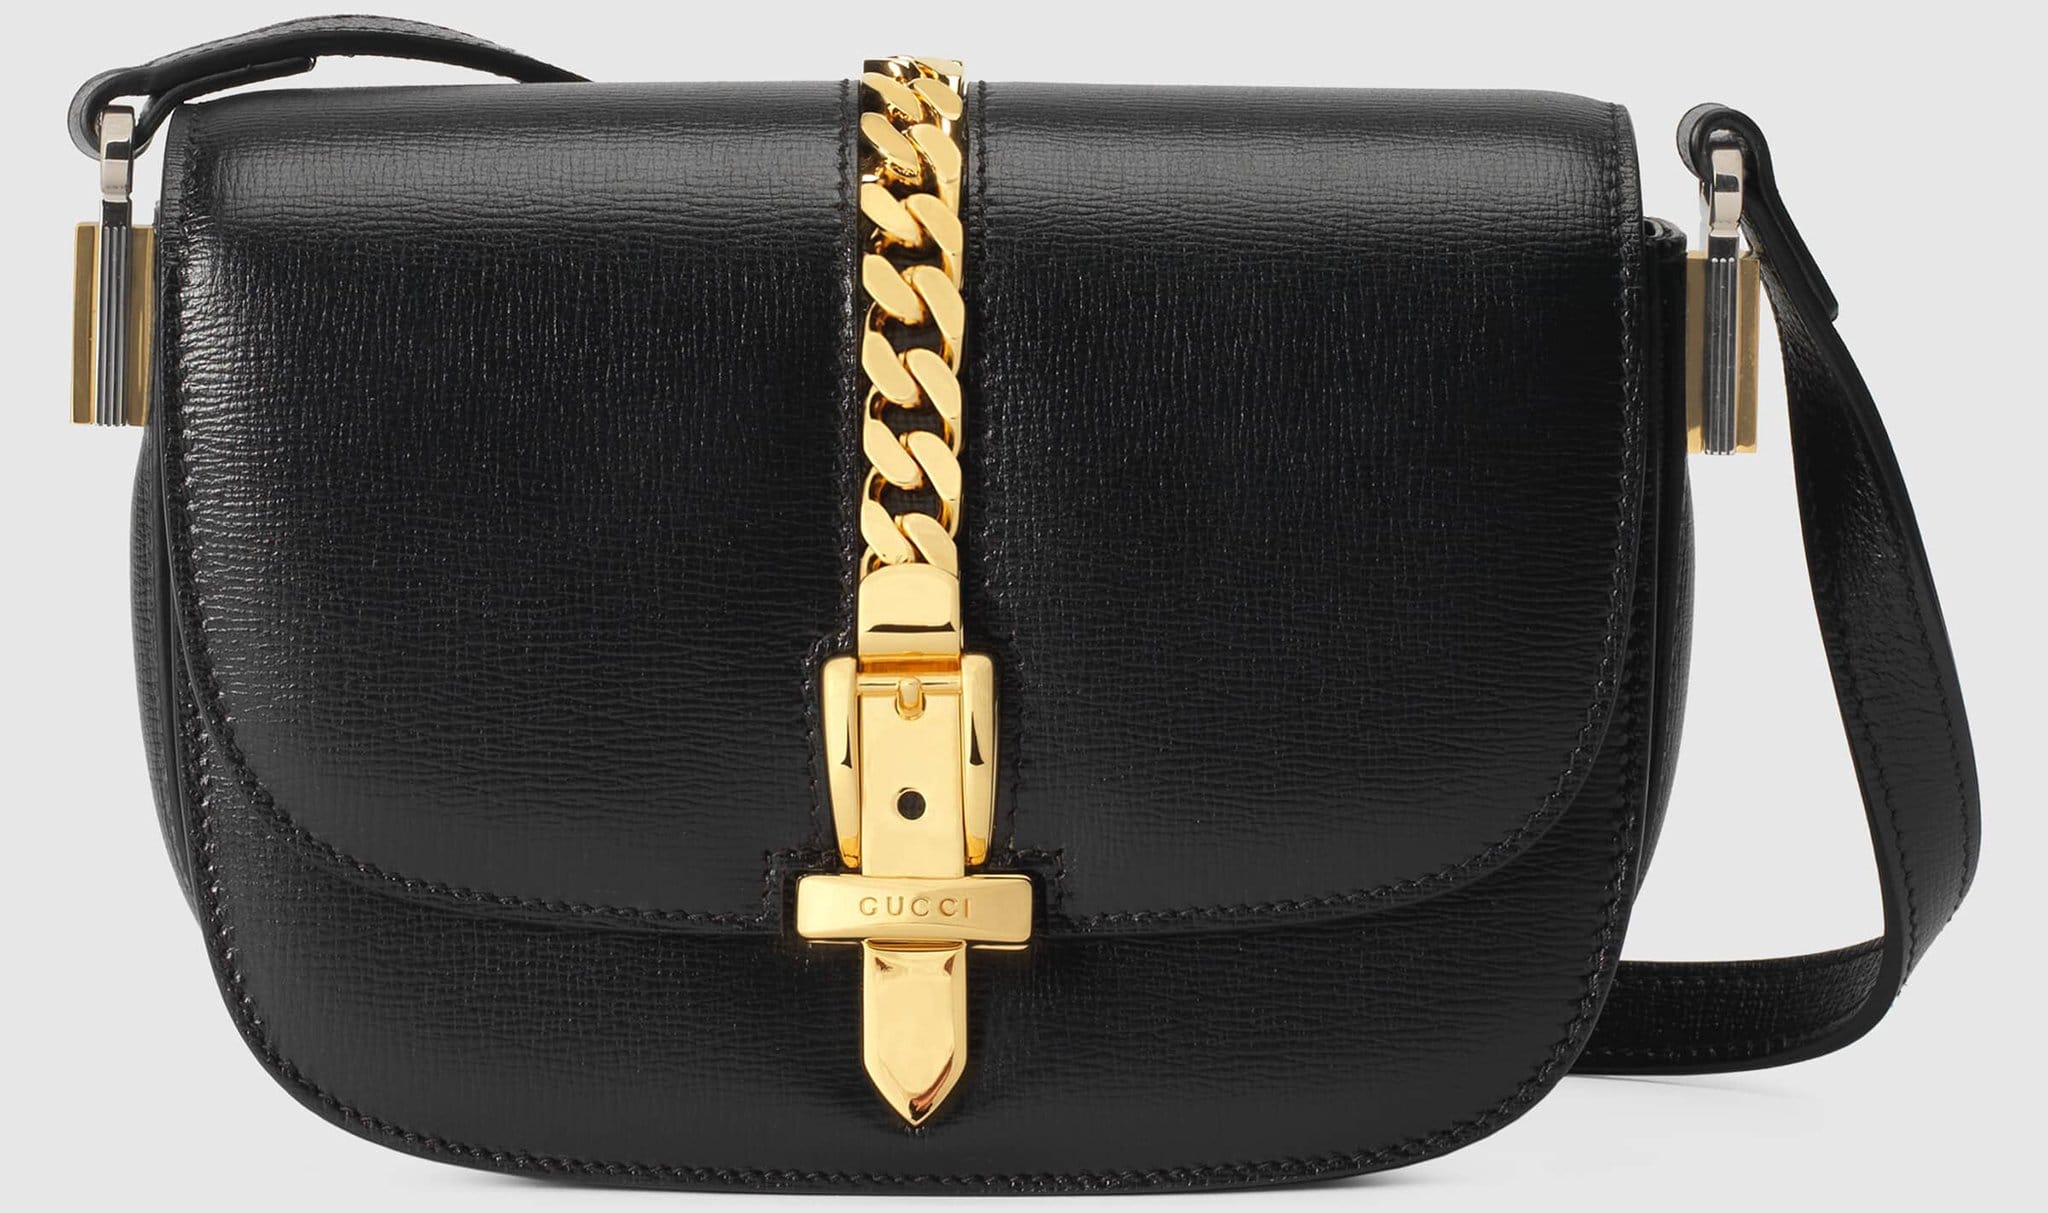 Introduced in a mini size for Pre-Fall 2020, the Sylvie 1969 shoulder bag is defined by a narrow gold-toned metal chain fitted to the flap